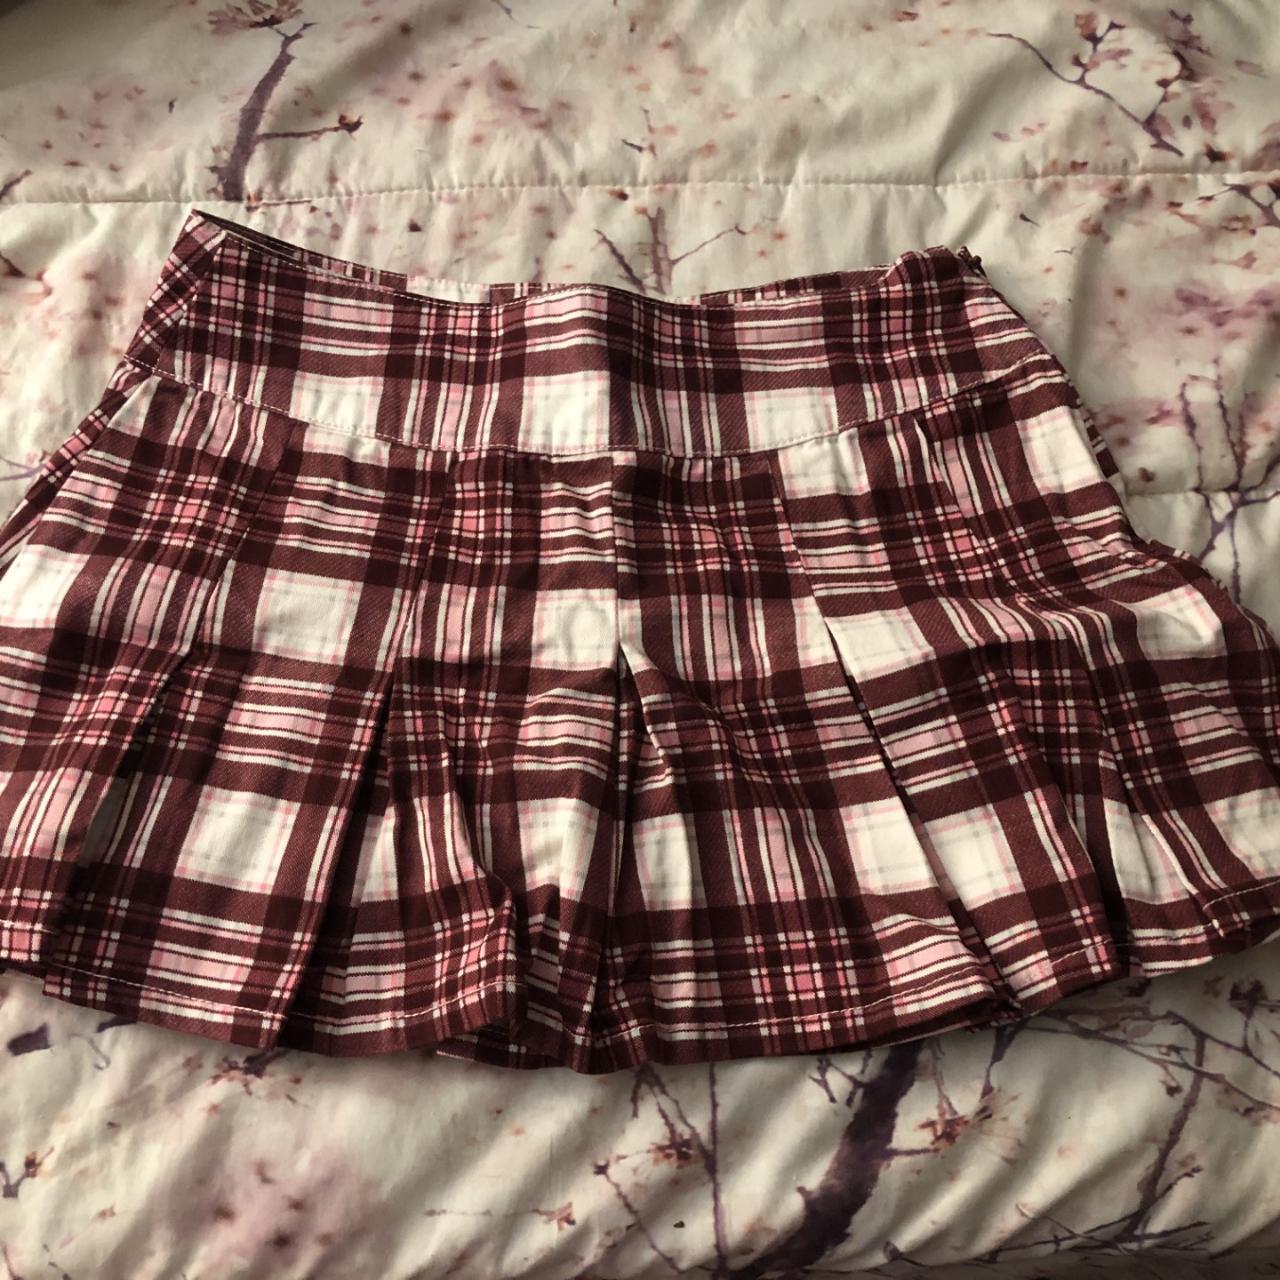 Red and pink plaid mini skirt - Depop